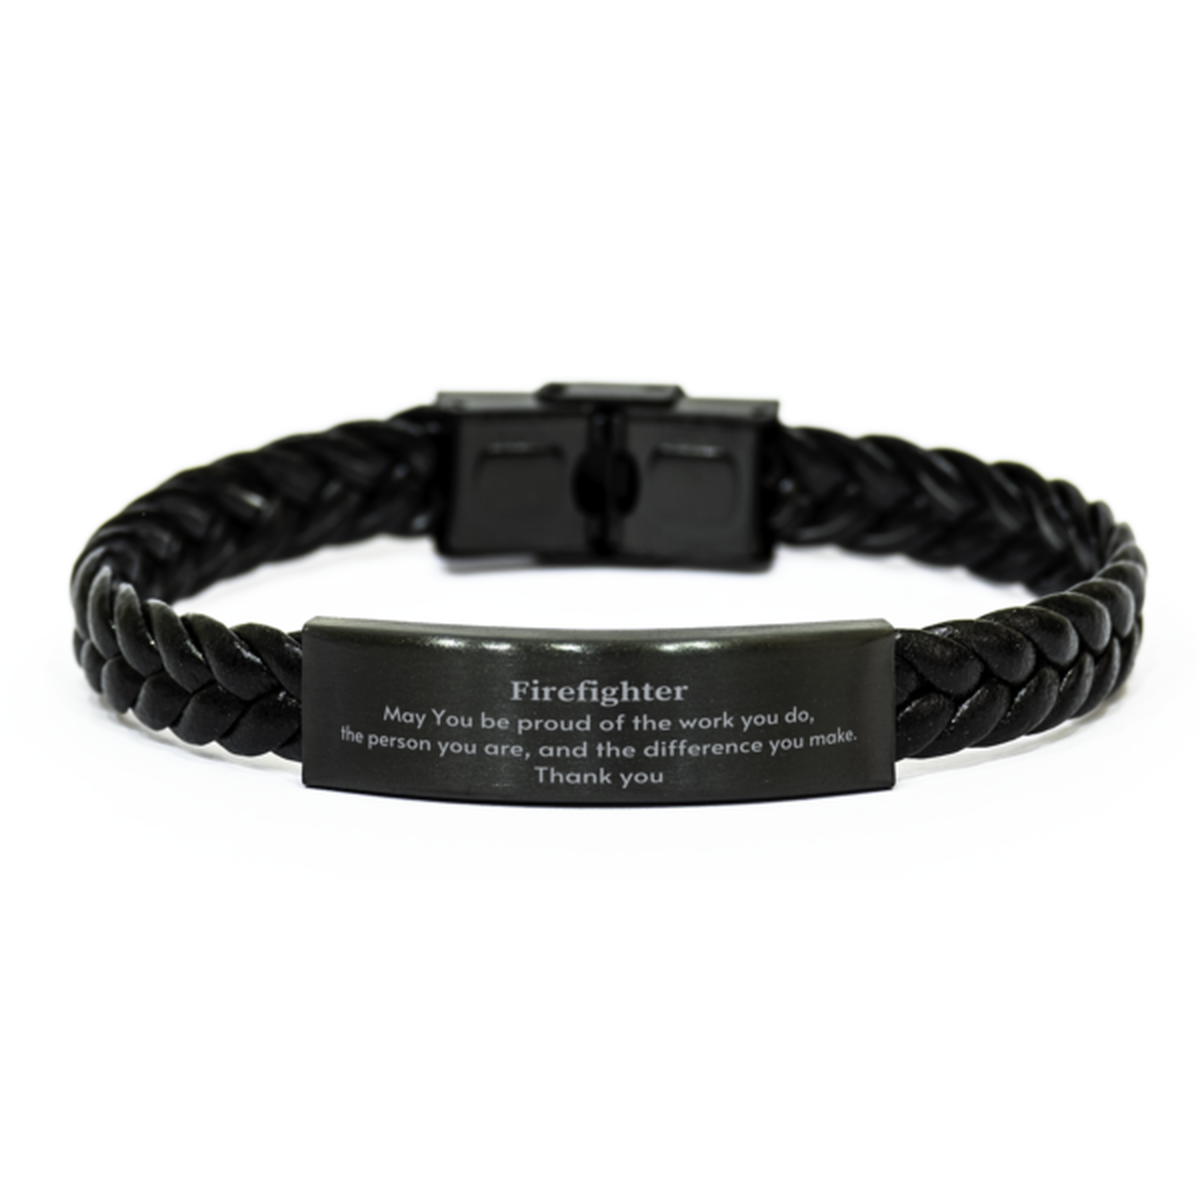 Heartwarming Braided Leather Bracelet Retirement Coworkers Gifts for Firefighter, Firefighter May You be proud of the work you do, the person you are Gifts for Boss Men Women Friends